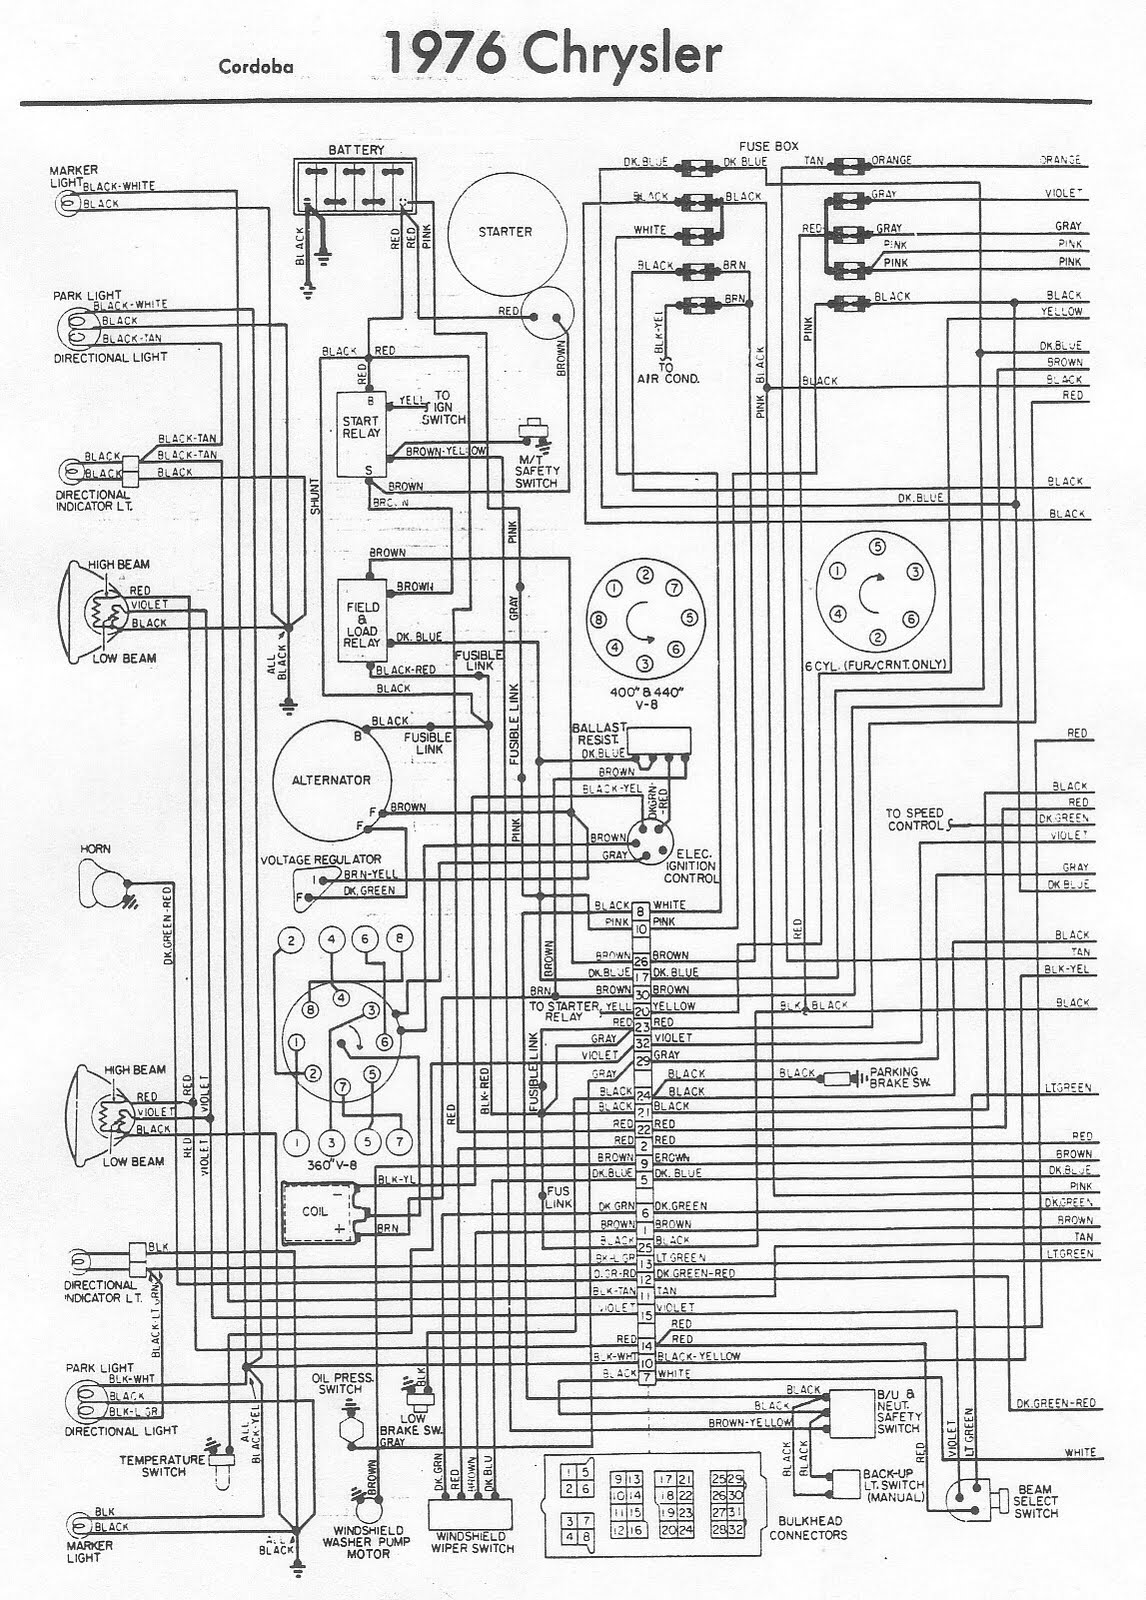 wiring diagram for lz110-3